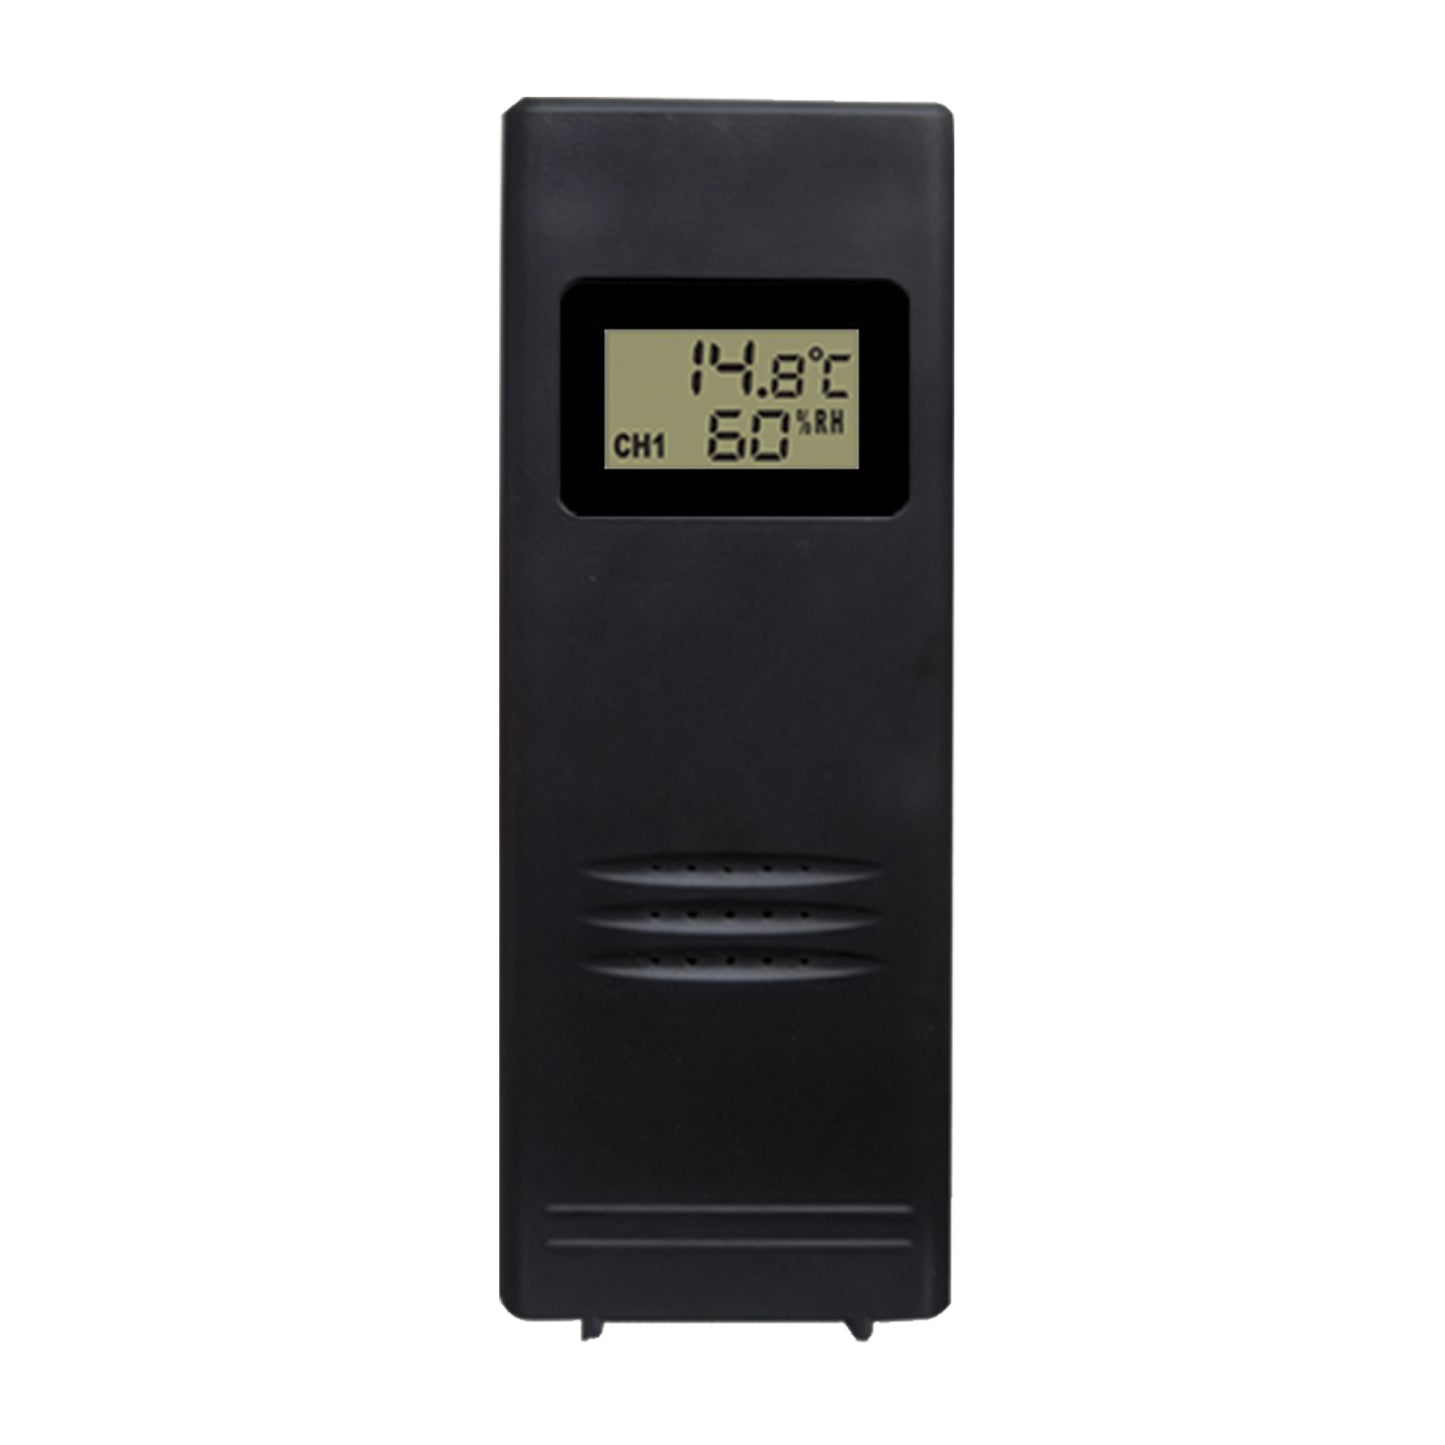 INTERNAL / OUTDOOR COLOR USB WEATHER STATION WITH HYGROMETER 